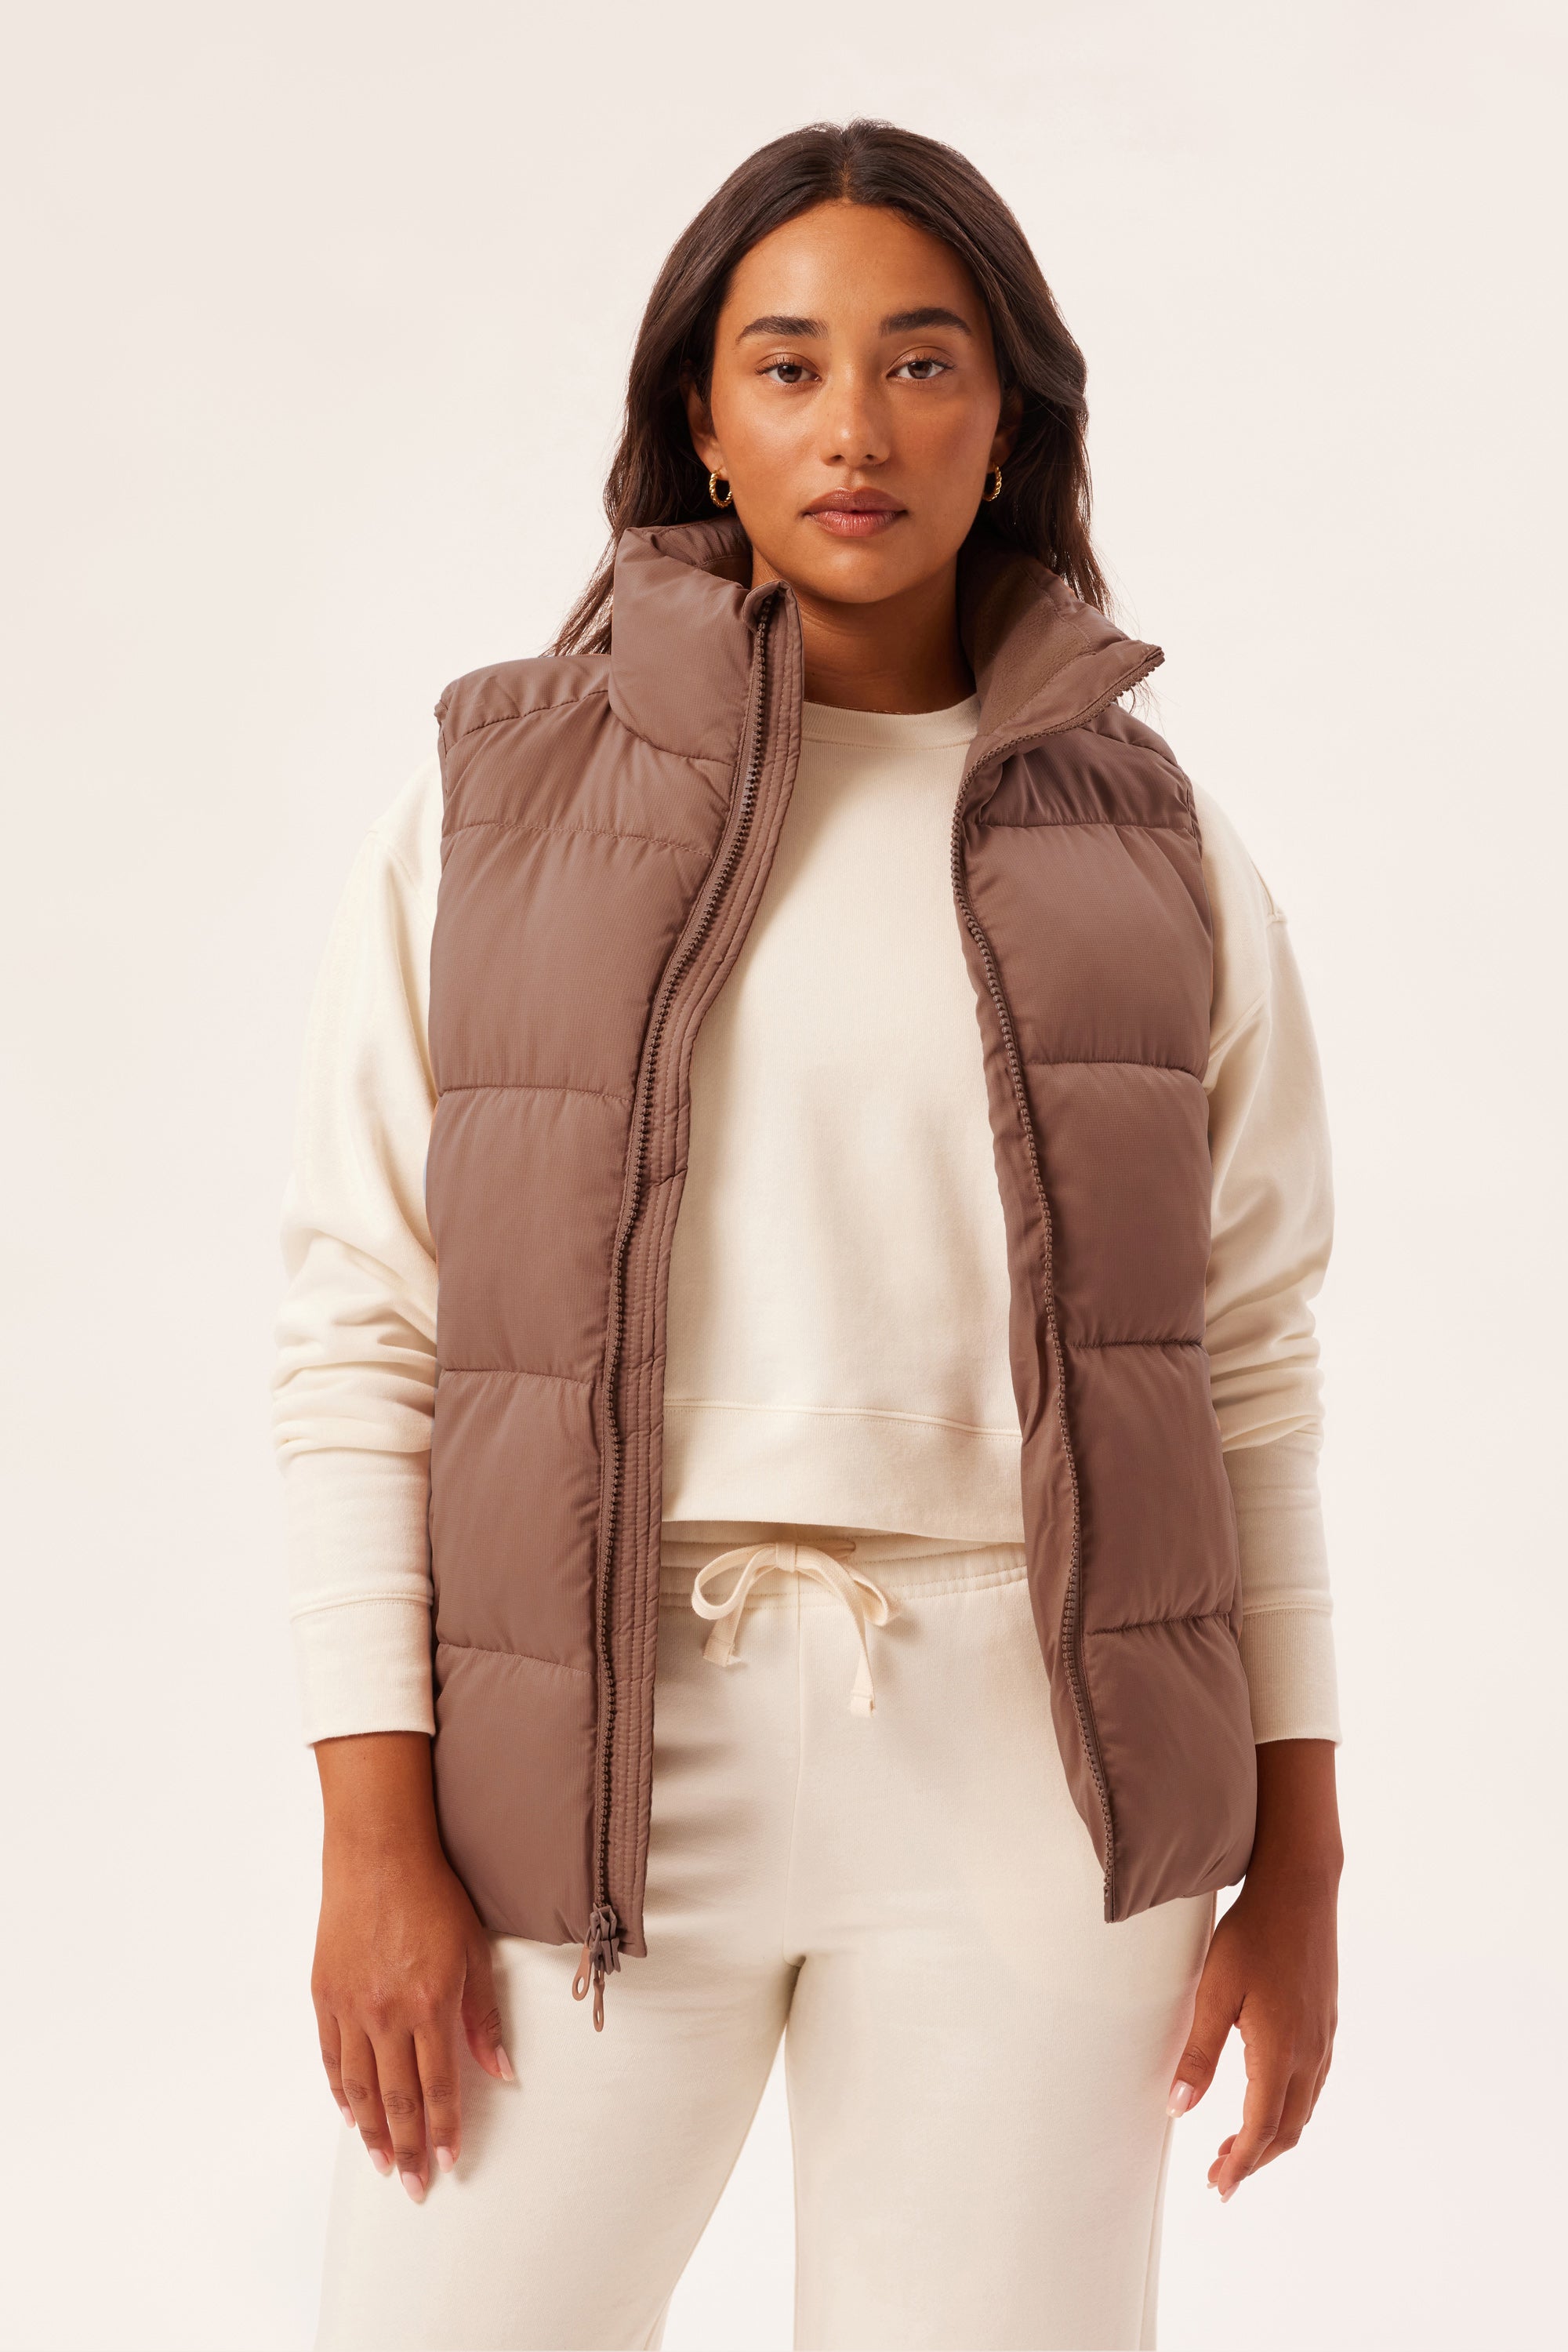 EST99 All Over Thin Puffer – Established 99